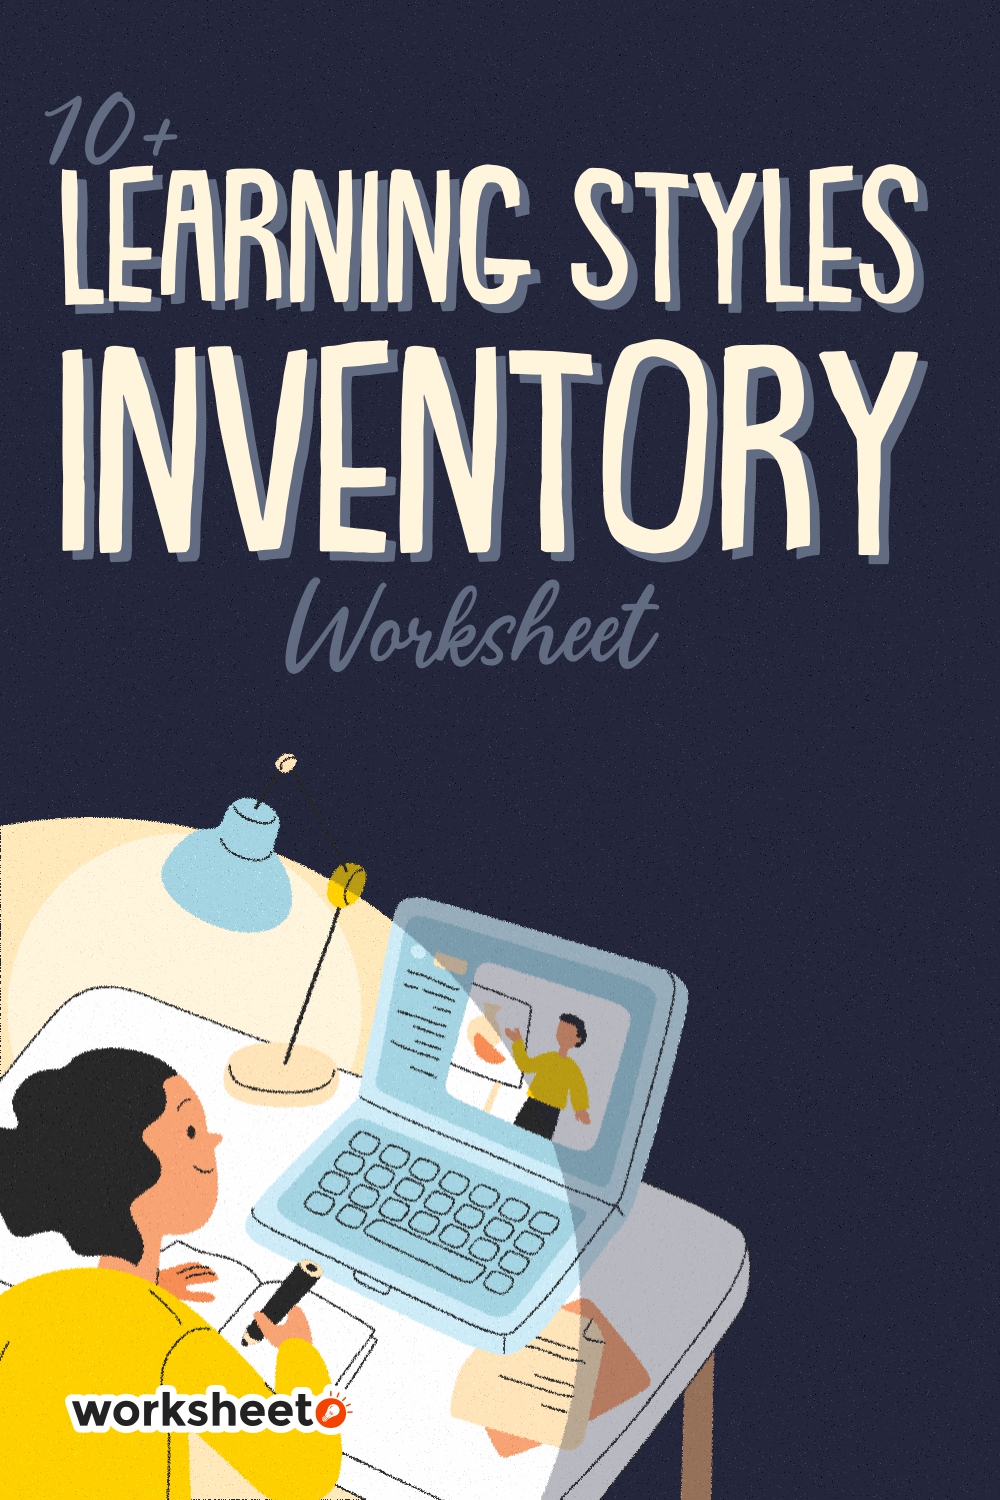 13 Images of Learning Styles Inventory Worksheet